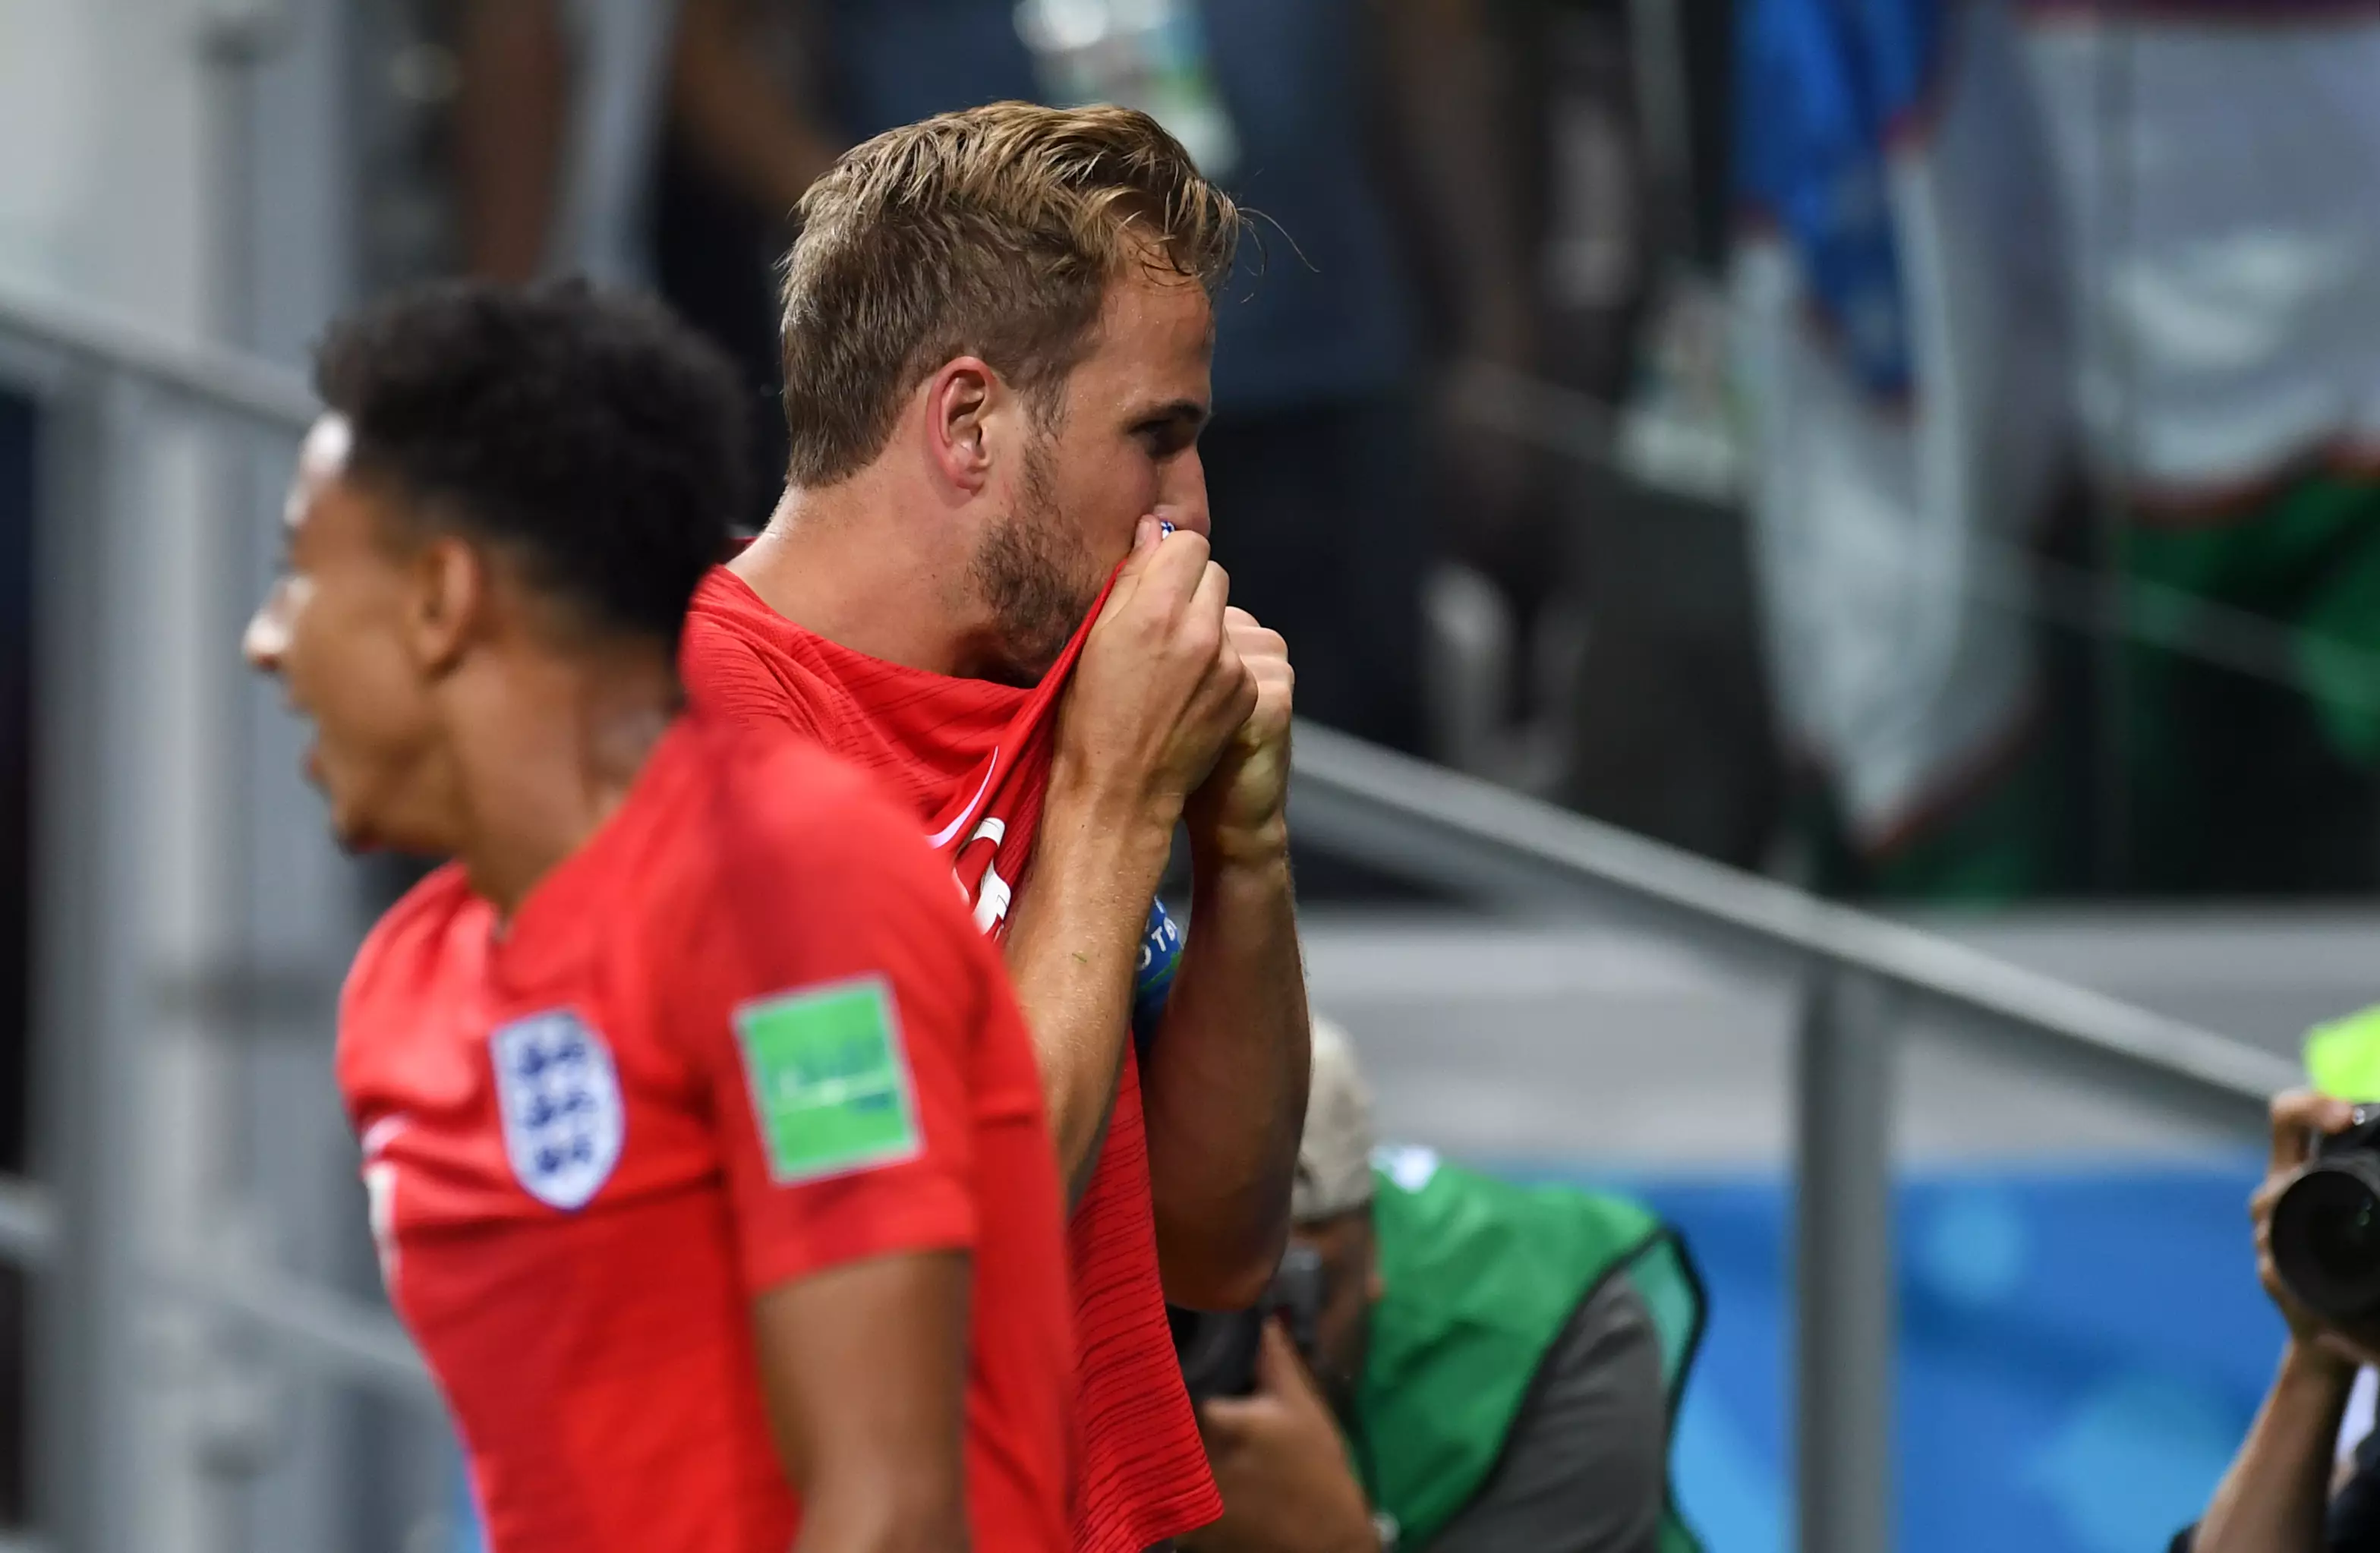 Kane kisses the badge after scoring for England. Image: PA